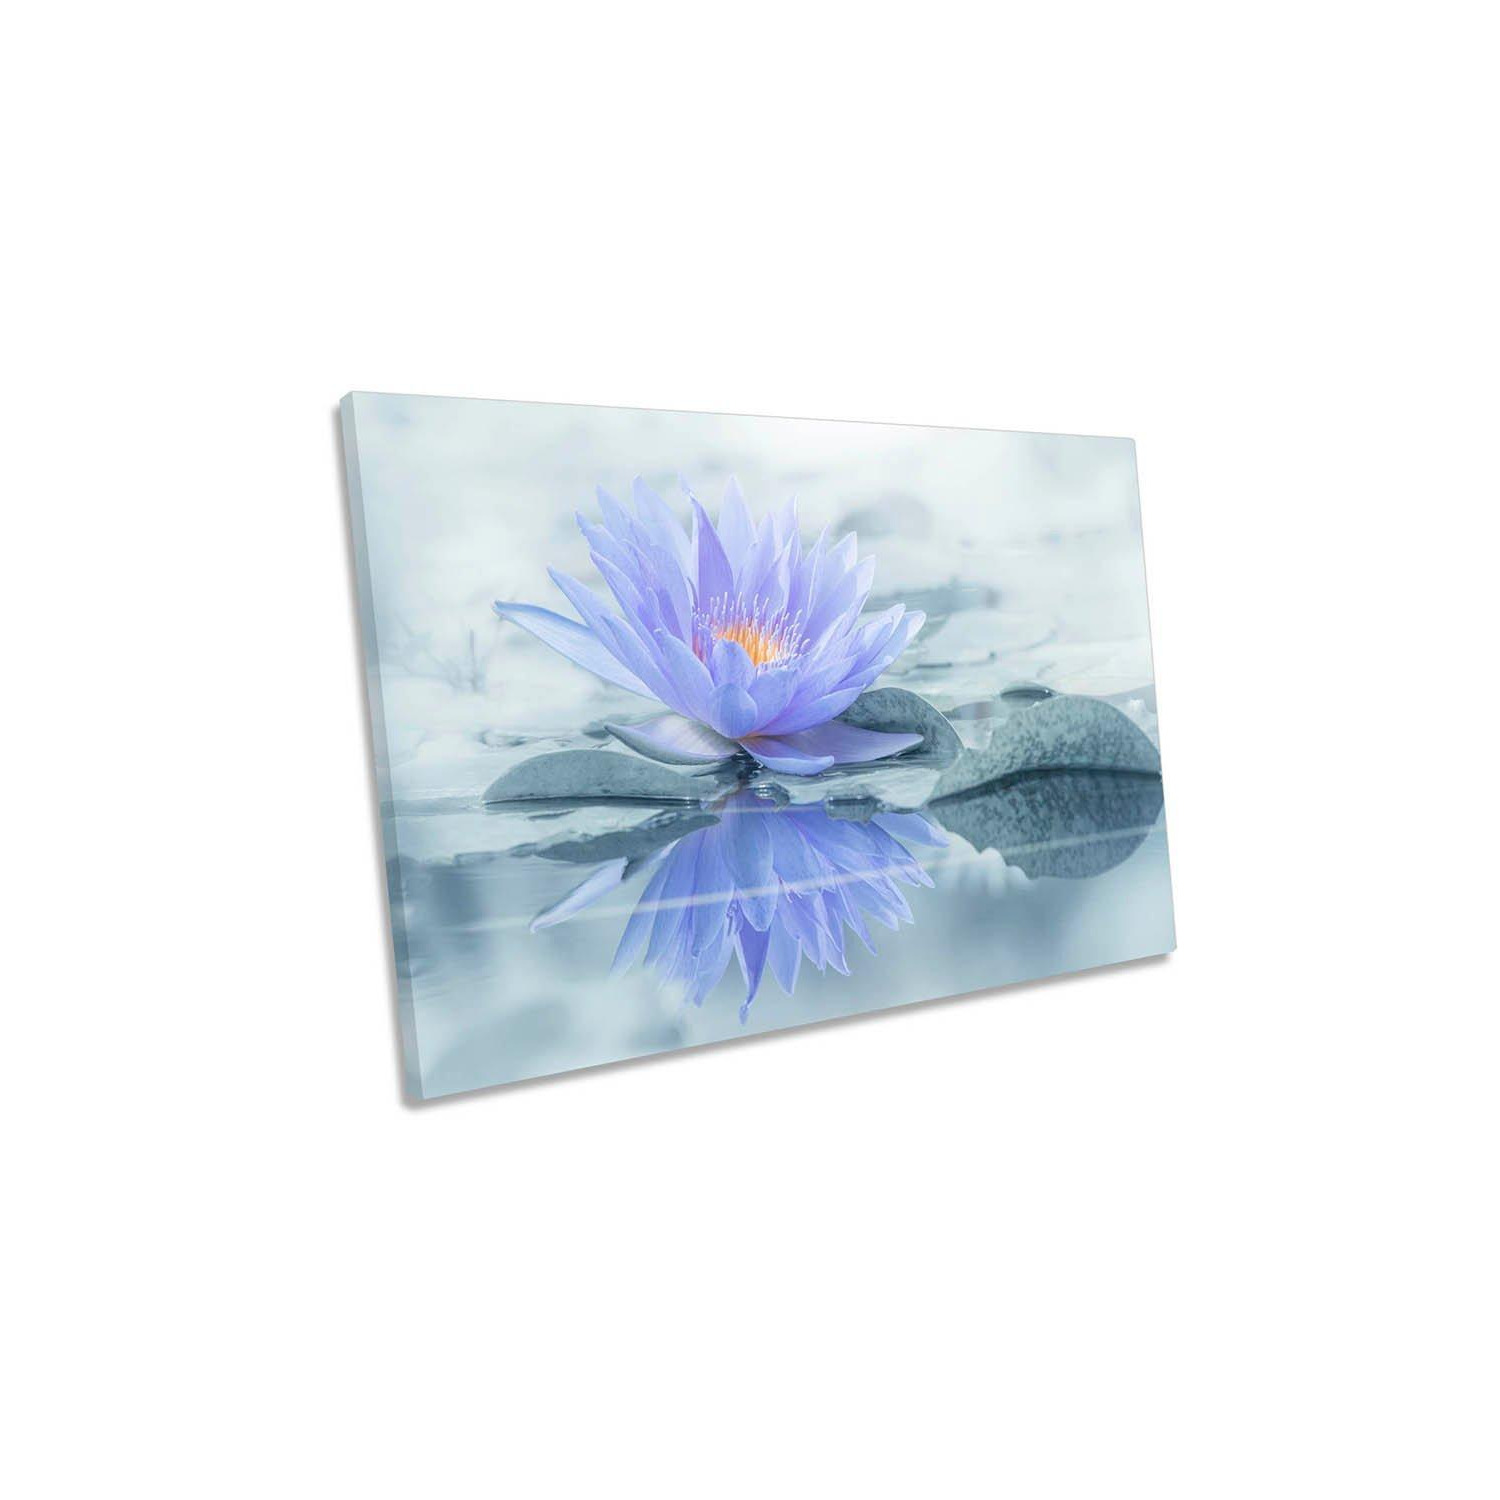 Peace Zen Water Lilly Tranquil Floral Canvas Wall Art Picture Print - image 1